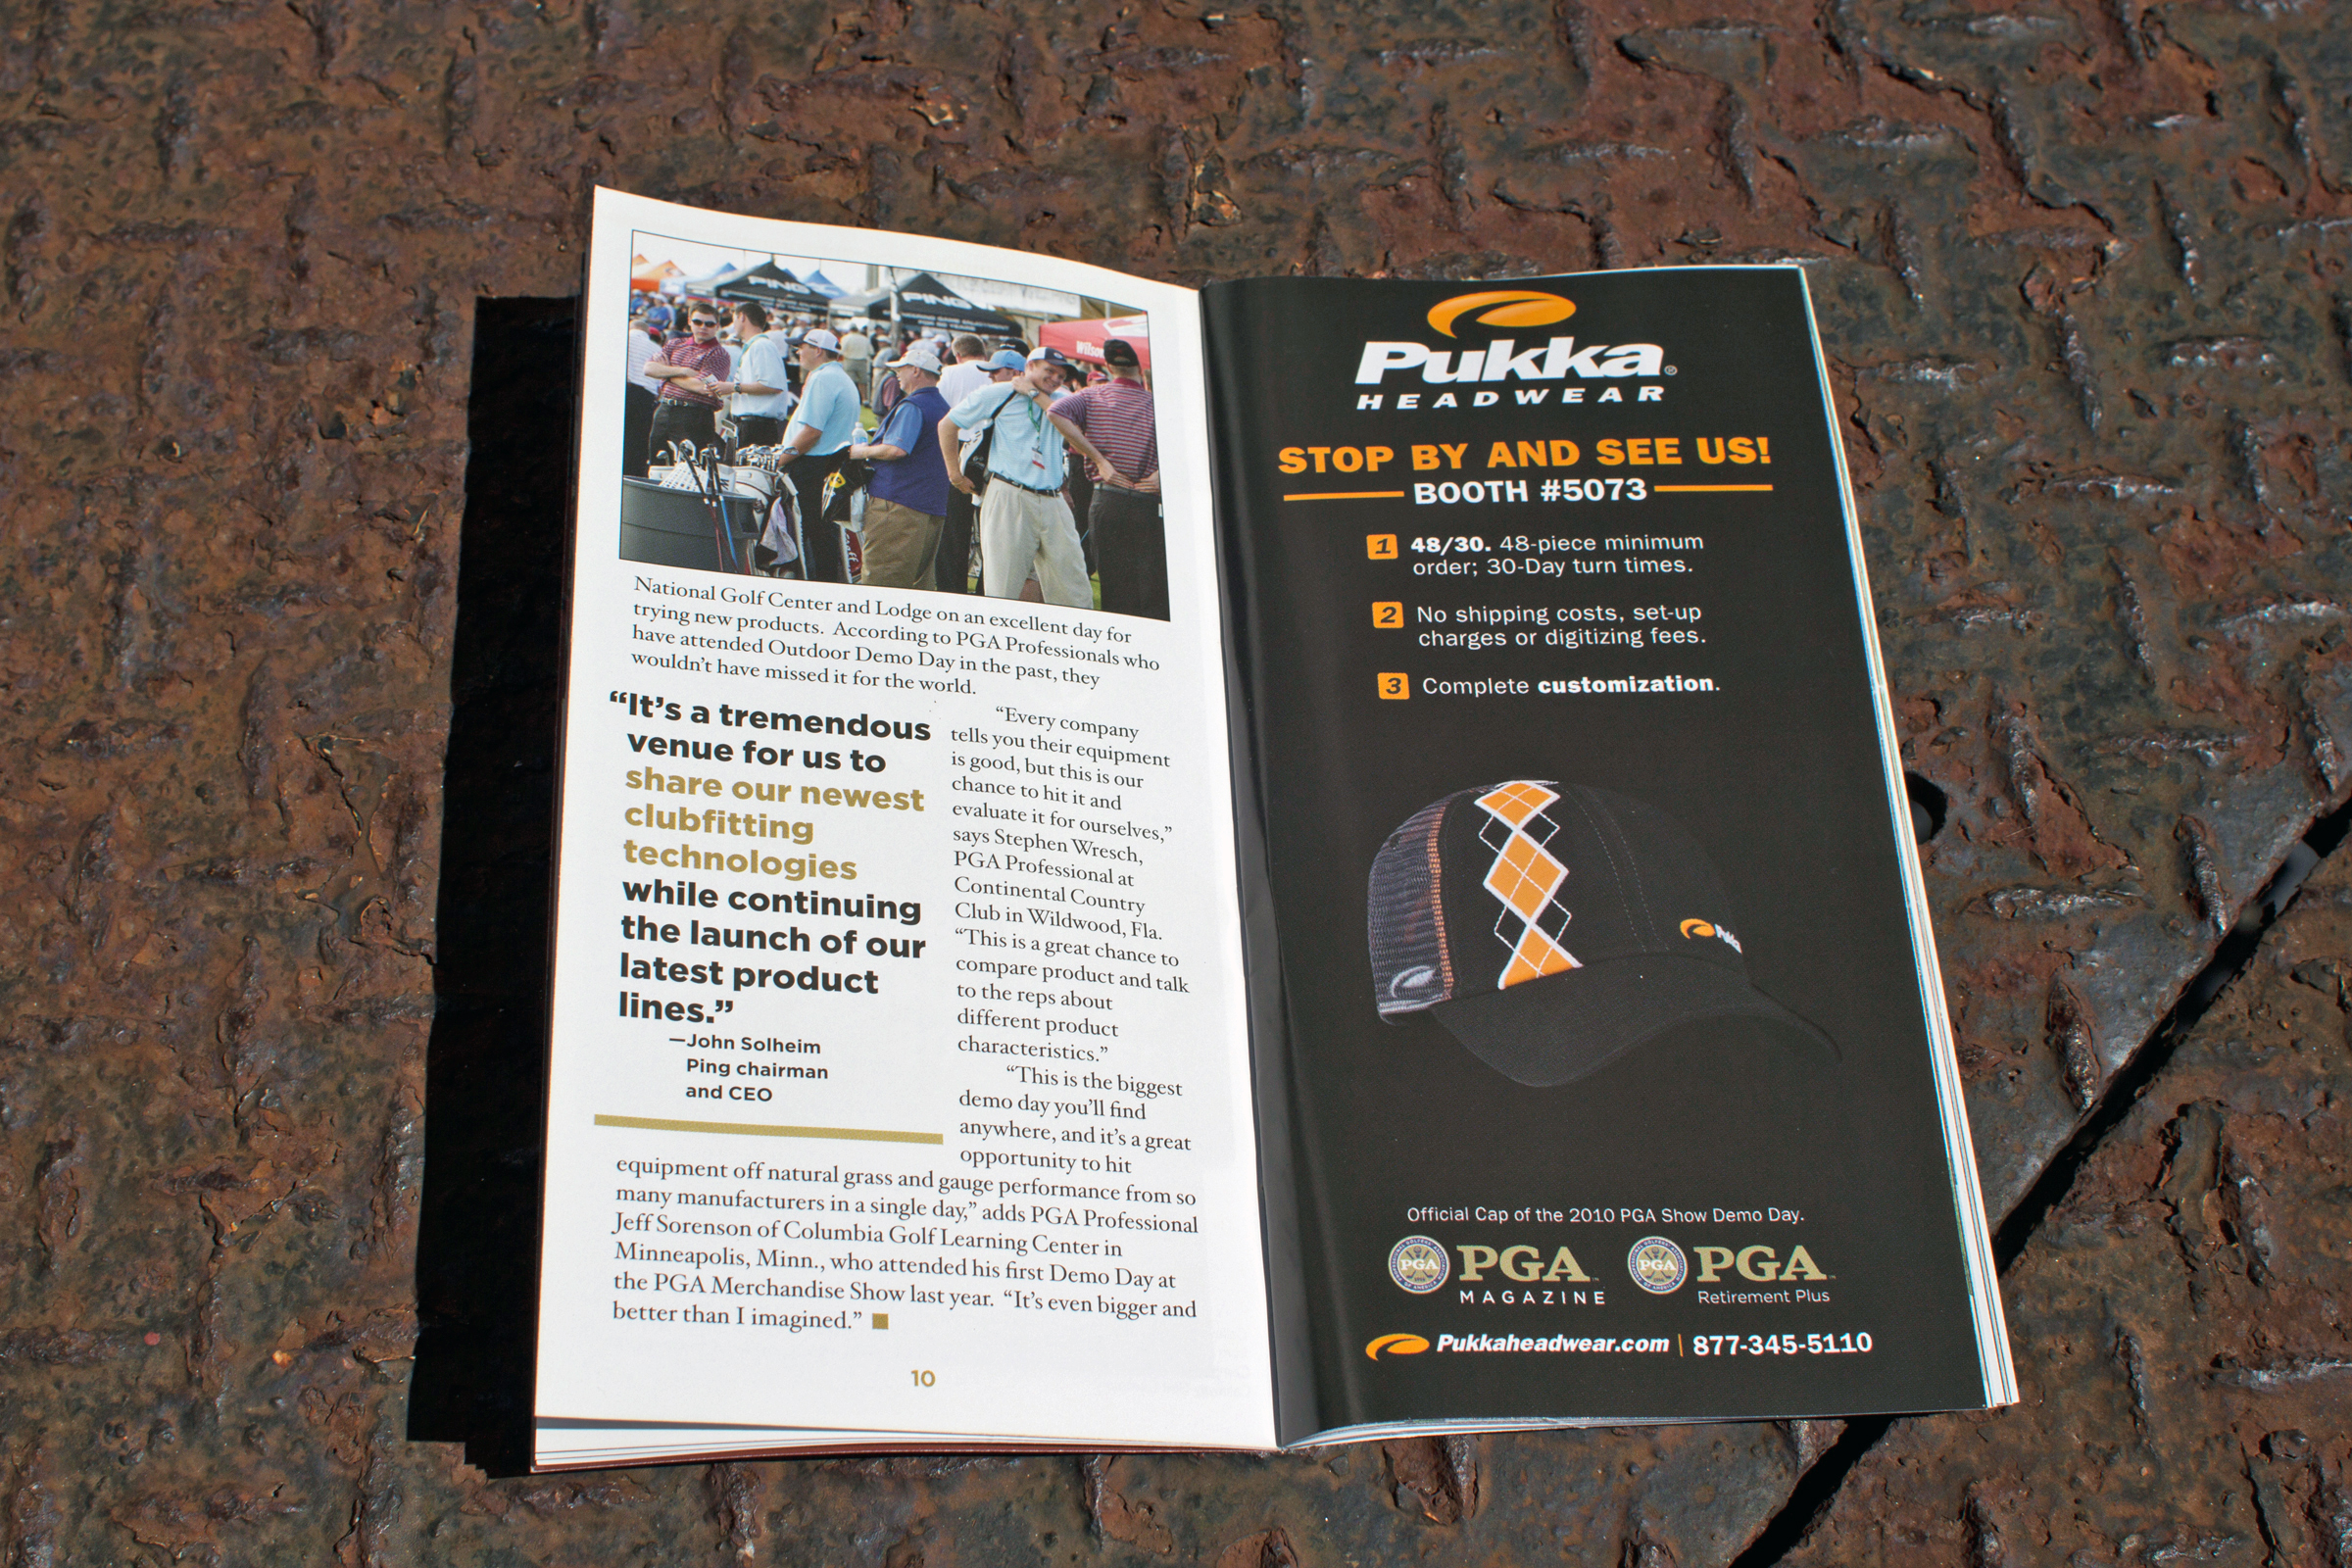 Guide to Demo Day by PGA Magazine, 2010 PGA Merchandise Show.